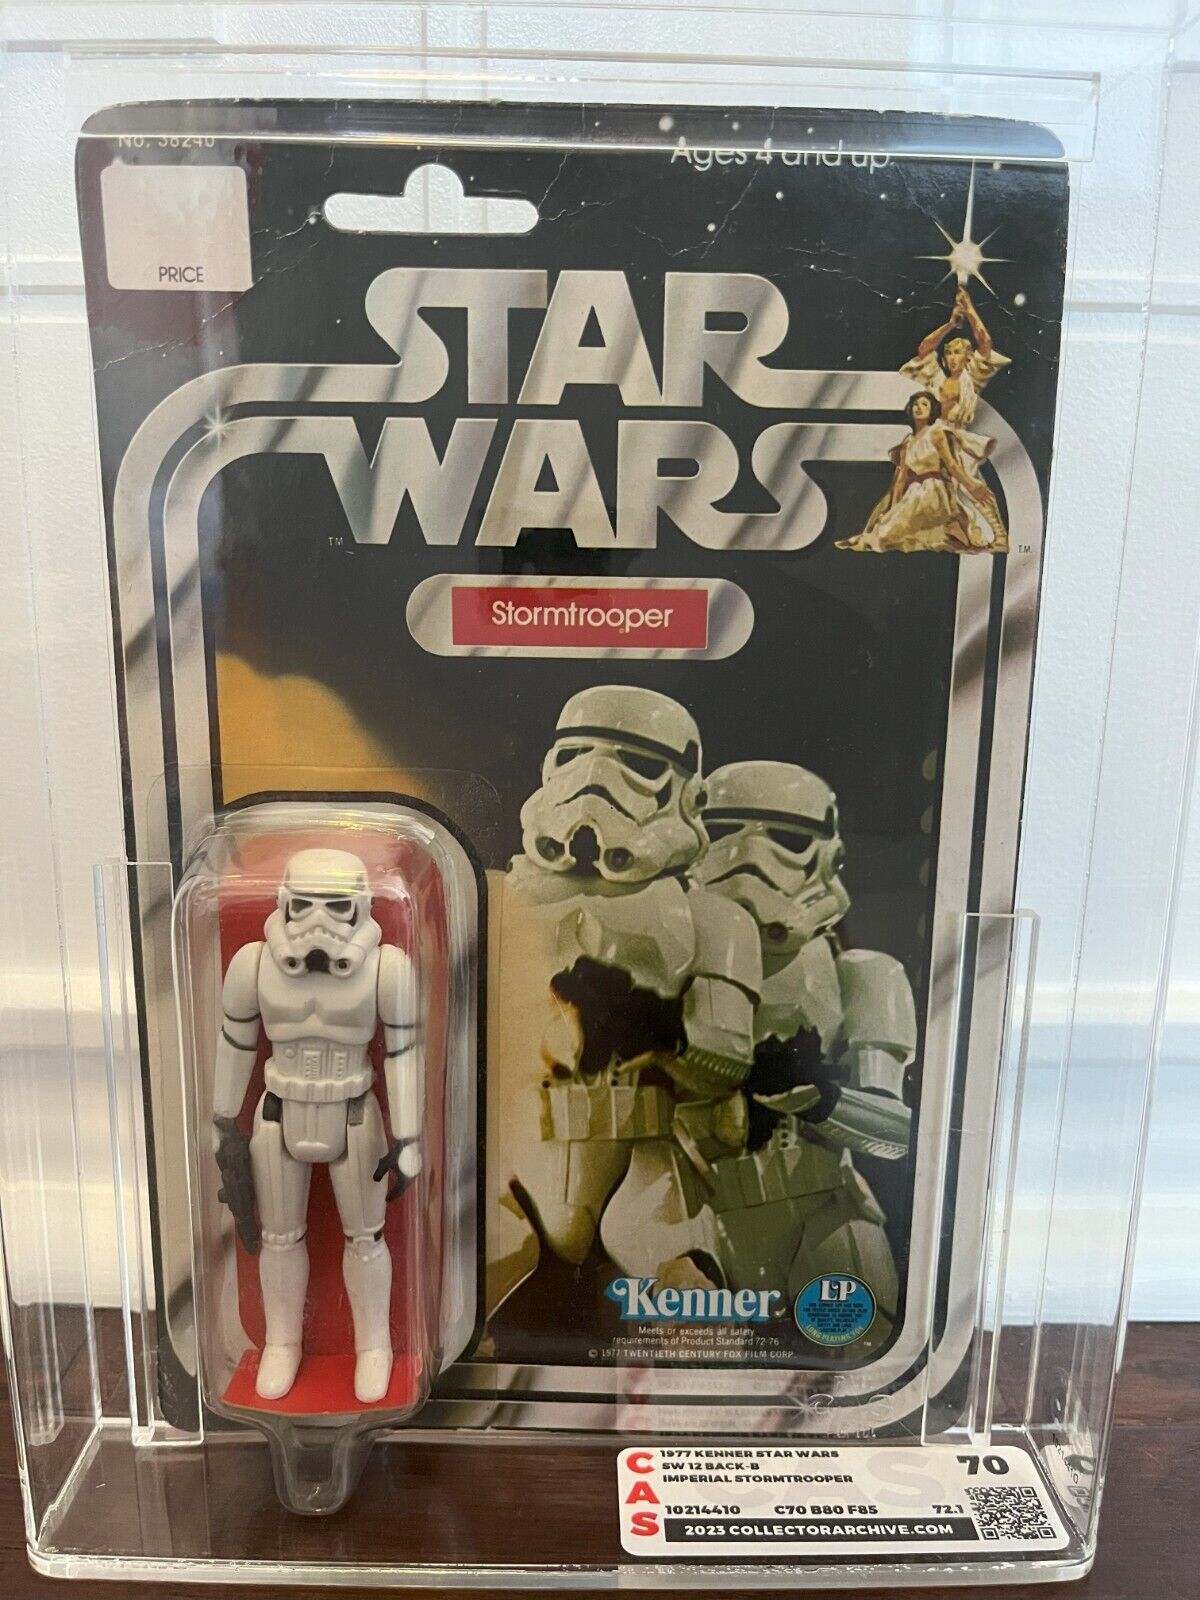 Imperial Stormtrooper sold